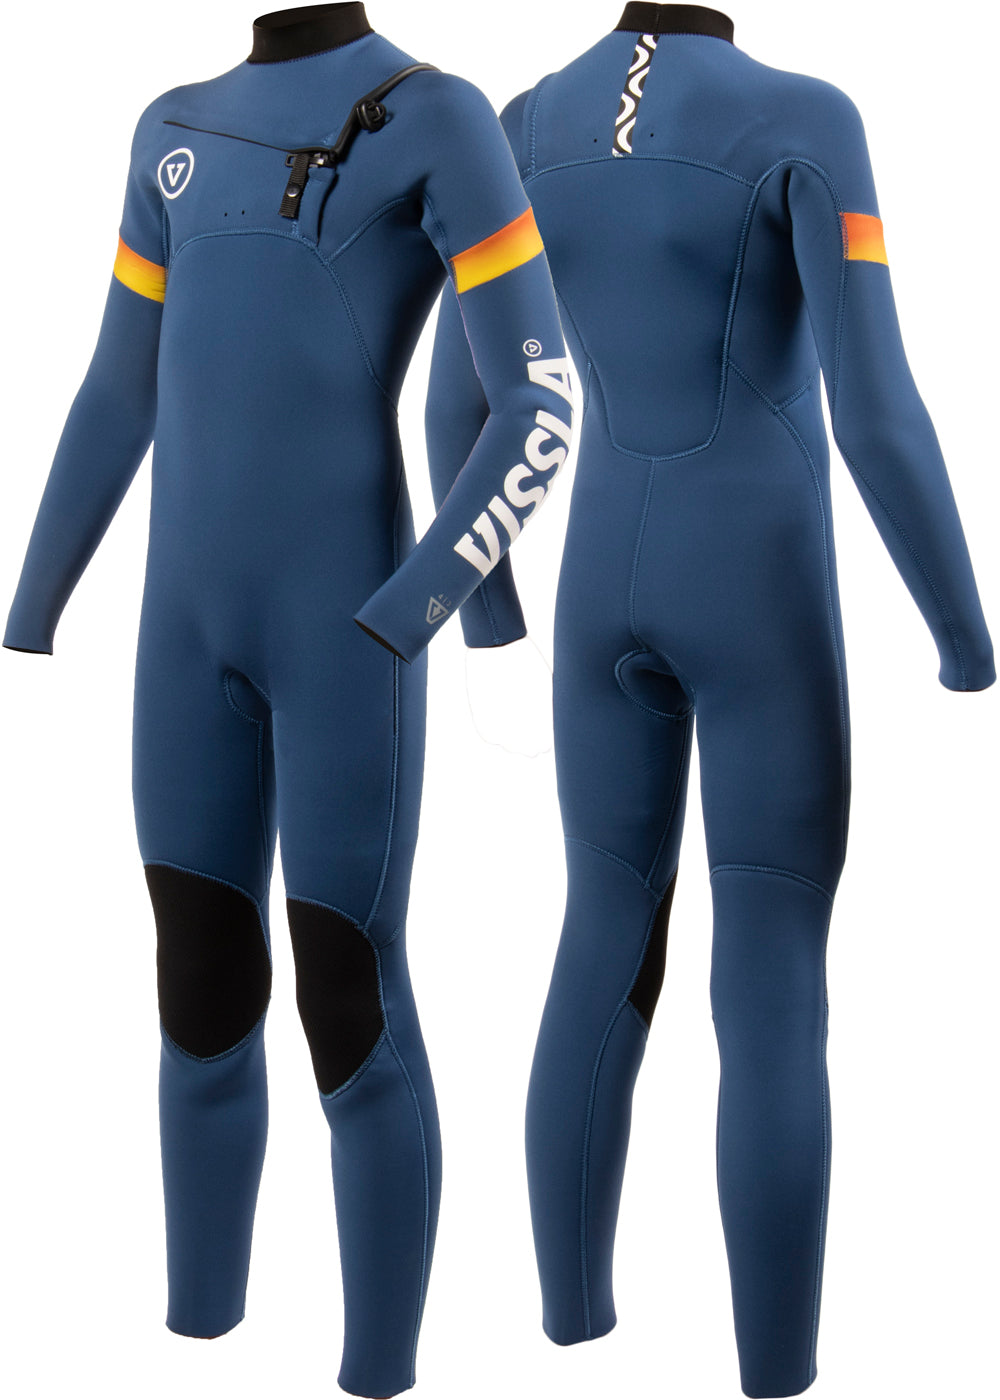 Vissla Harbor Blue 7 Seas Boys Raditude 3-2 Full Chest Zip Wetsuit. Front and Back View.